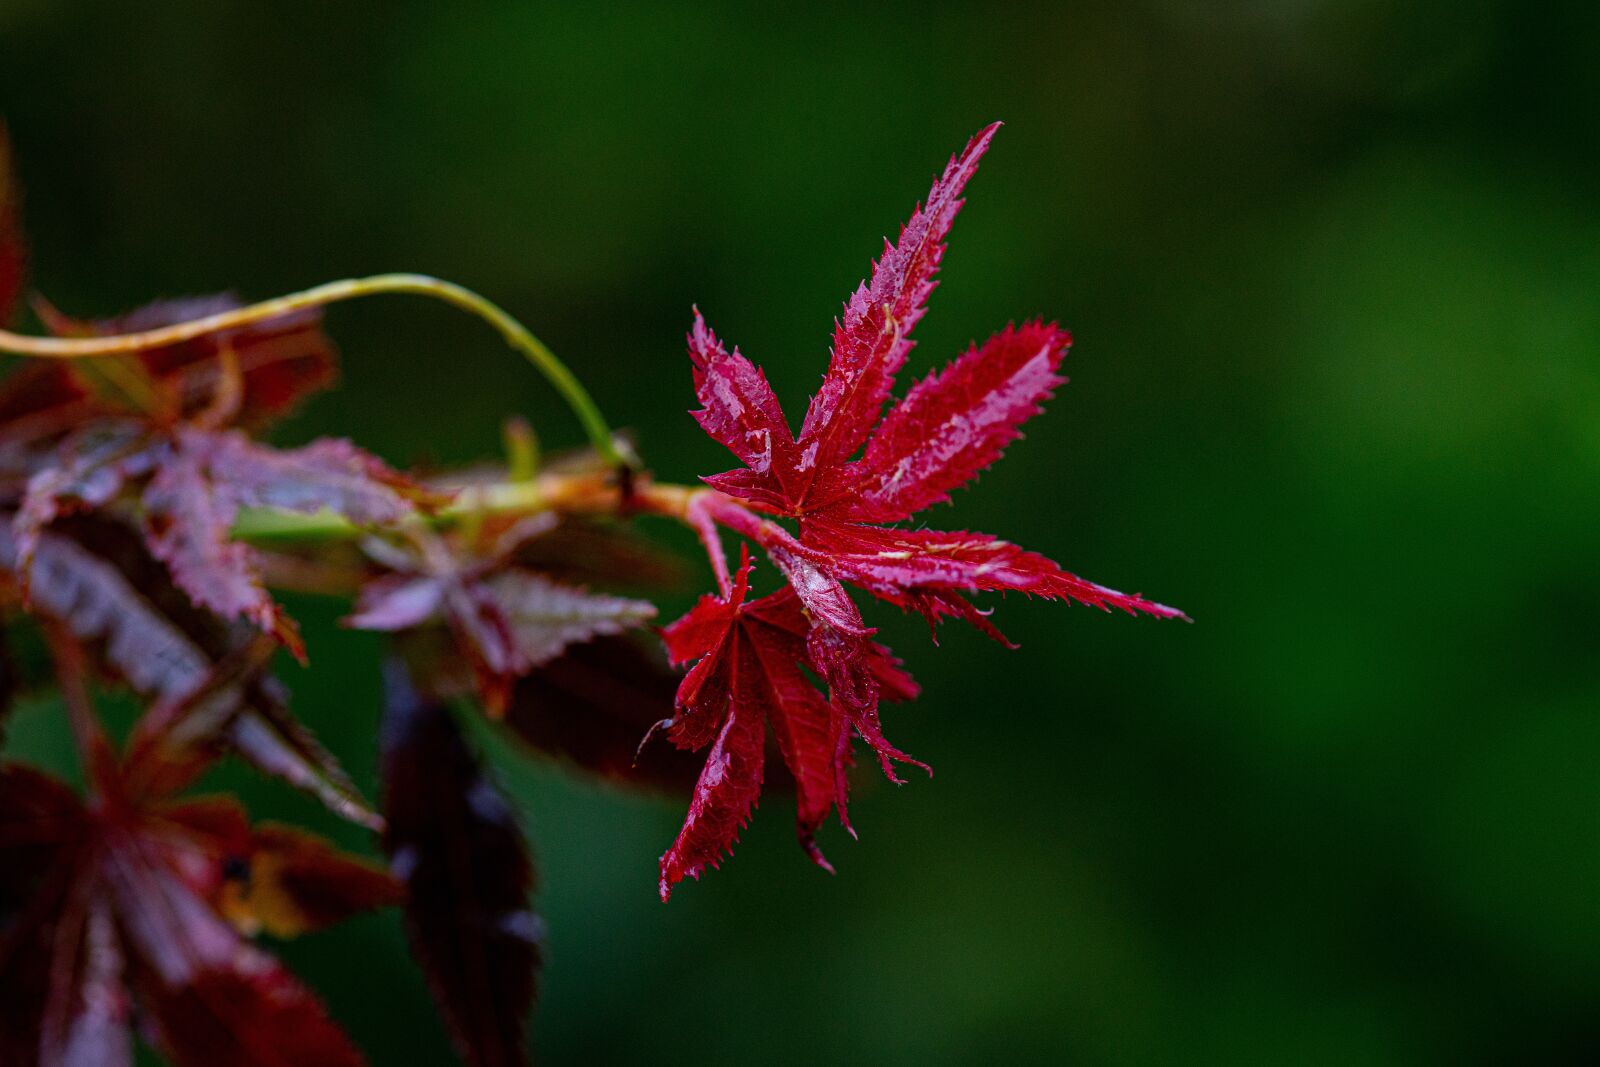 105mm F2.8 sample photo. Maple, leaves, red photography